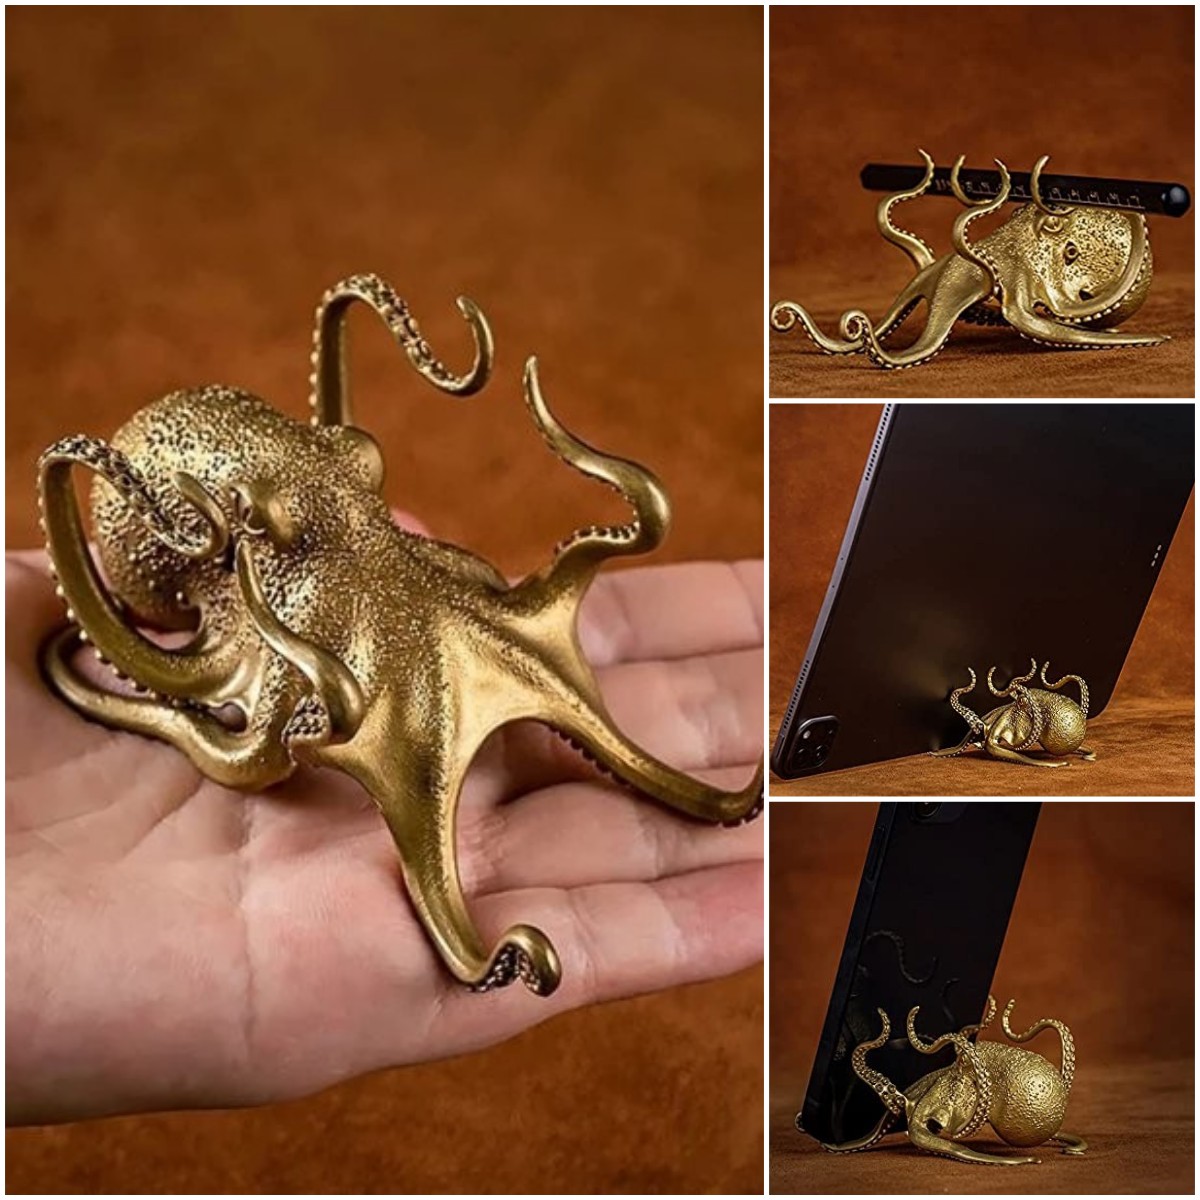 Hot Sale-50% OFF - Funny Octopus Phone Holder - 🎁Buy 2 Get EXTRA 10% OFF 